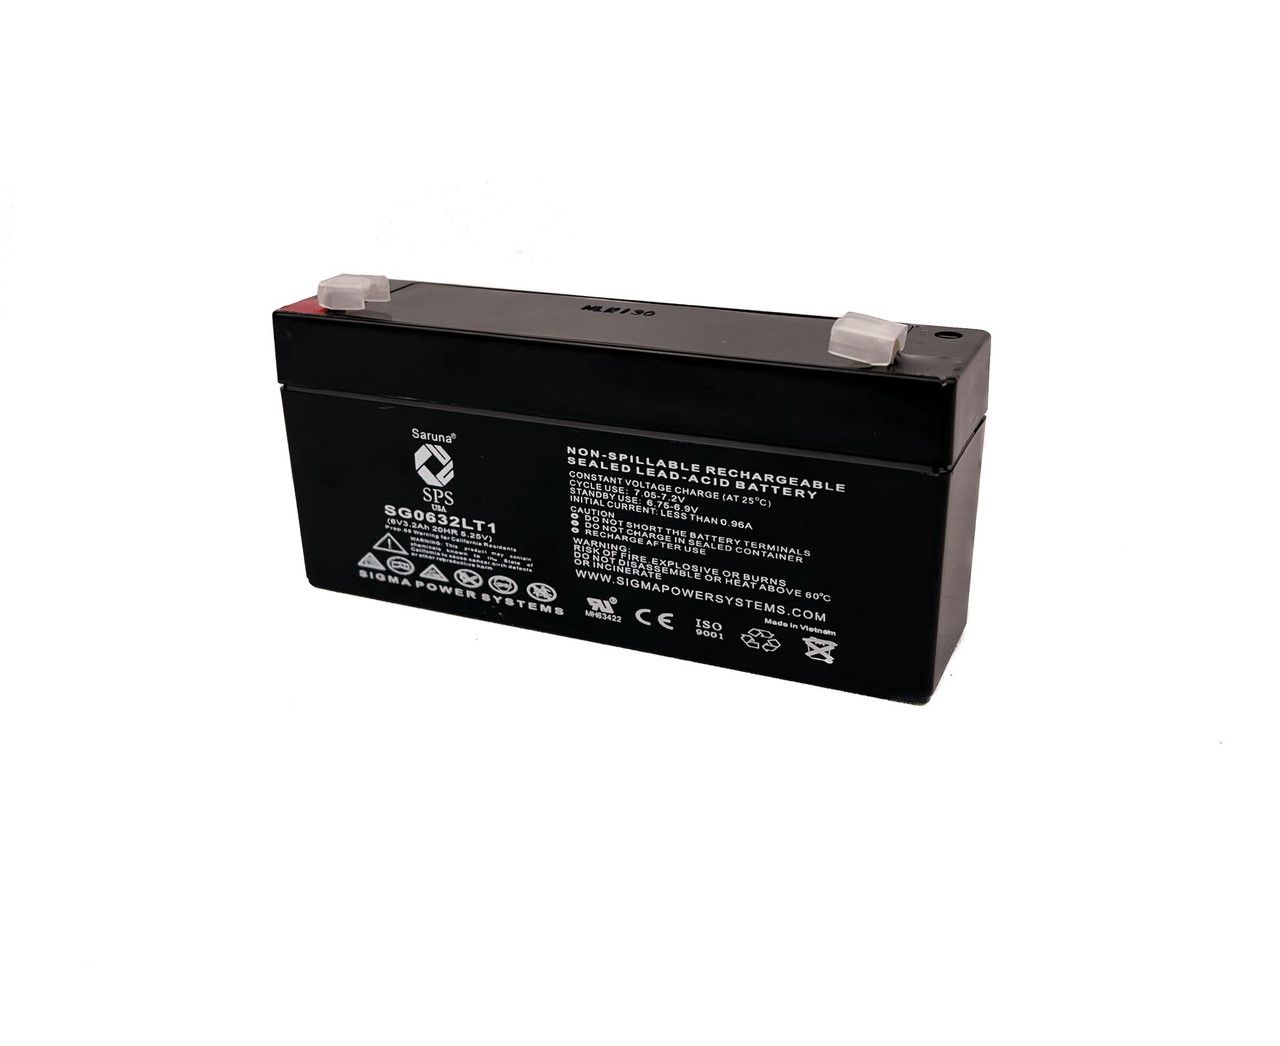 Raion Power 6V 3.2Ah Non-Spillable Replacement Rechargebale Battery for Health o meter 551KL Scale